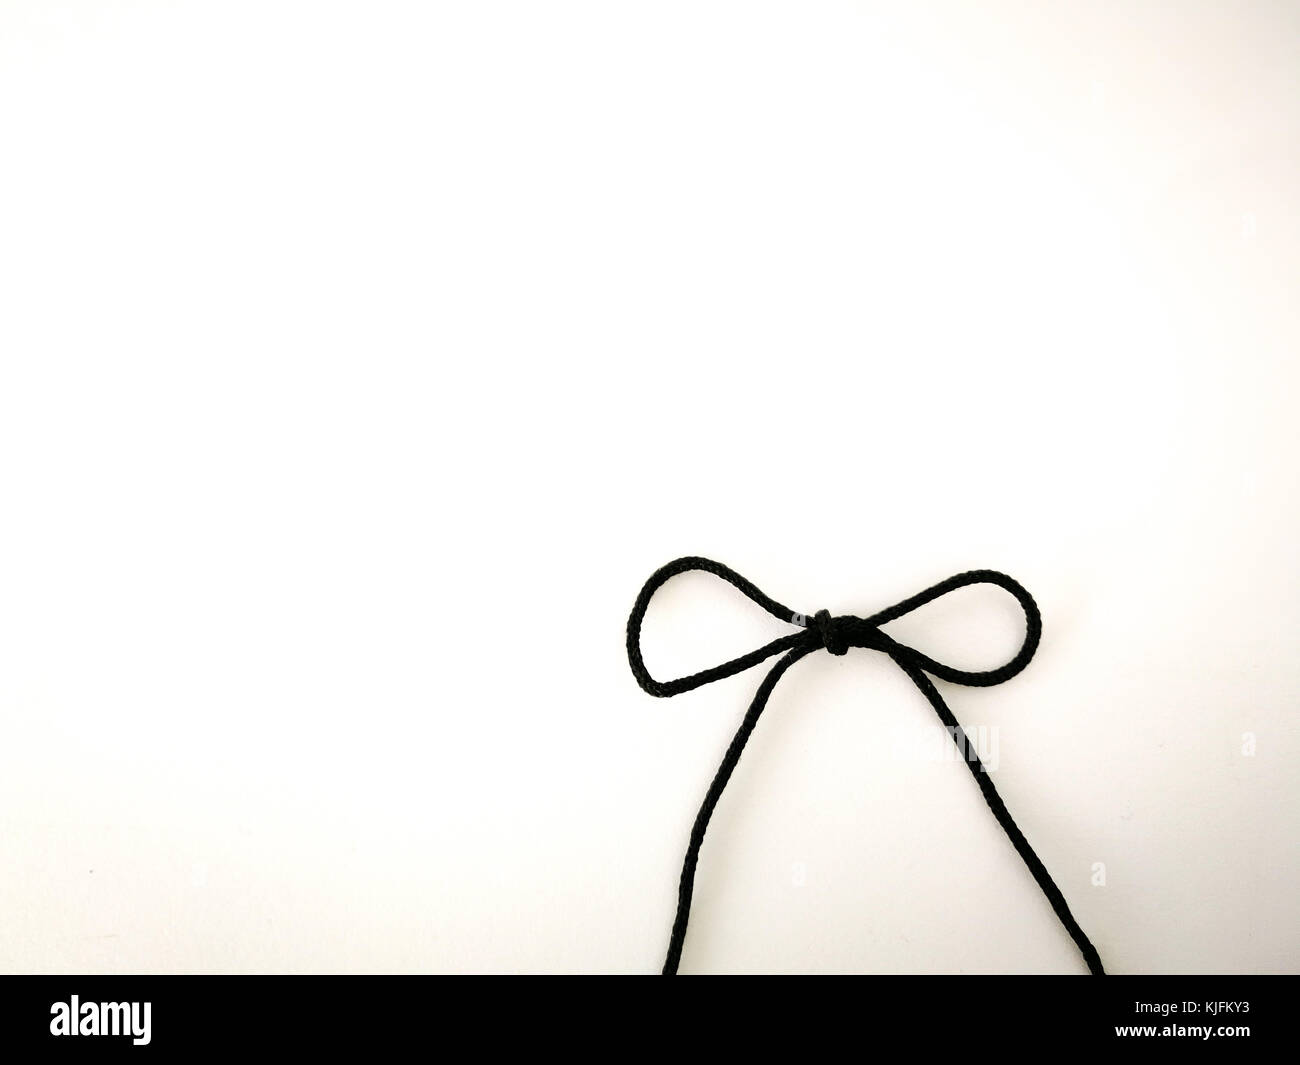 Rope bow black color on white isolated background. Stock Photo